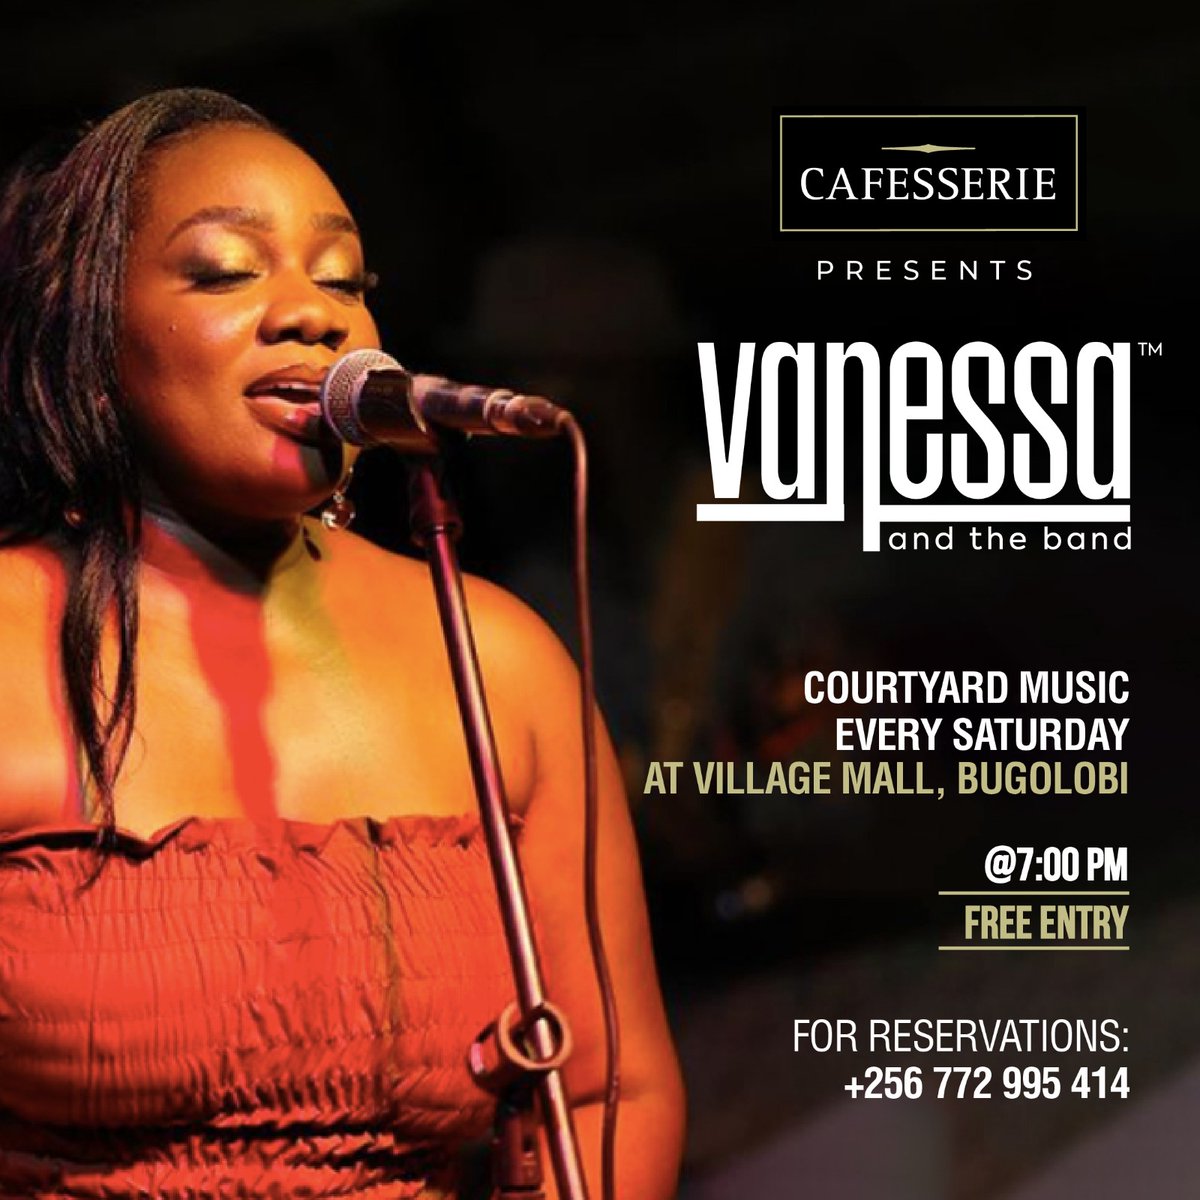 Today ,#Saturday evening come and wind down your day with great #food, amazing ambiance and an epic band #music performance by Vanessa and the band at Cafesserie Village mall bugolobi. 💃🎶🍝🍹 Starting at 7pm. #BeOurGuest #DineWithUs